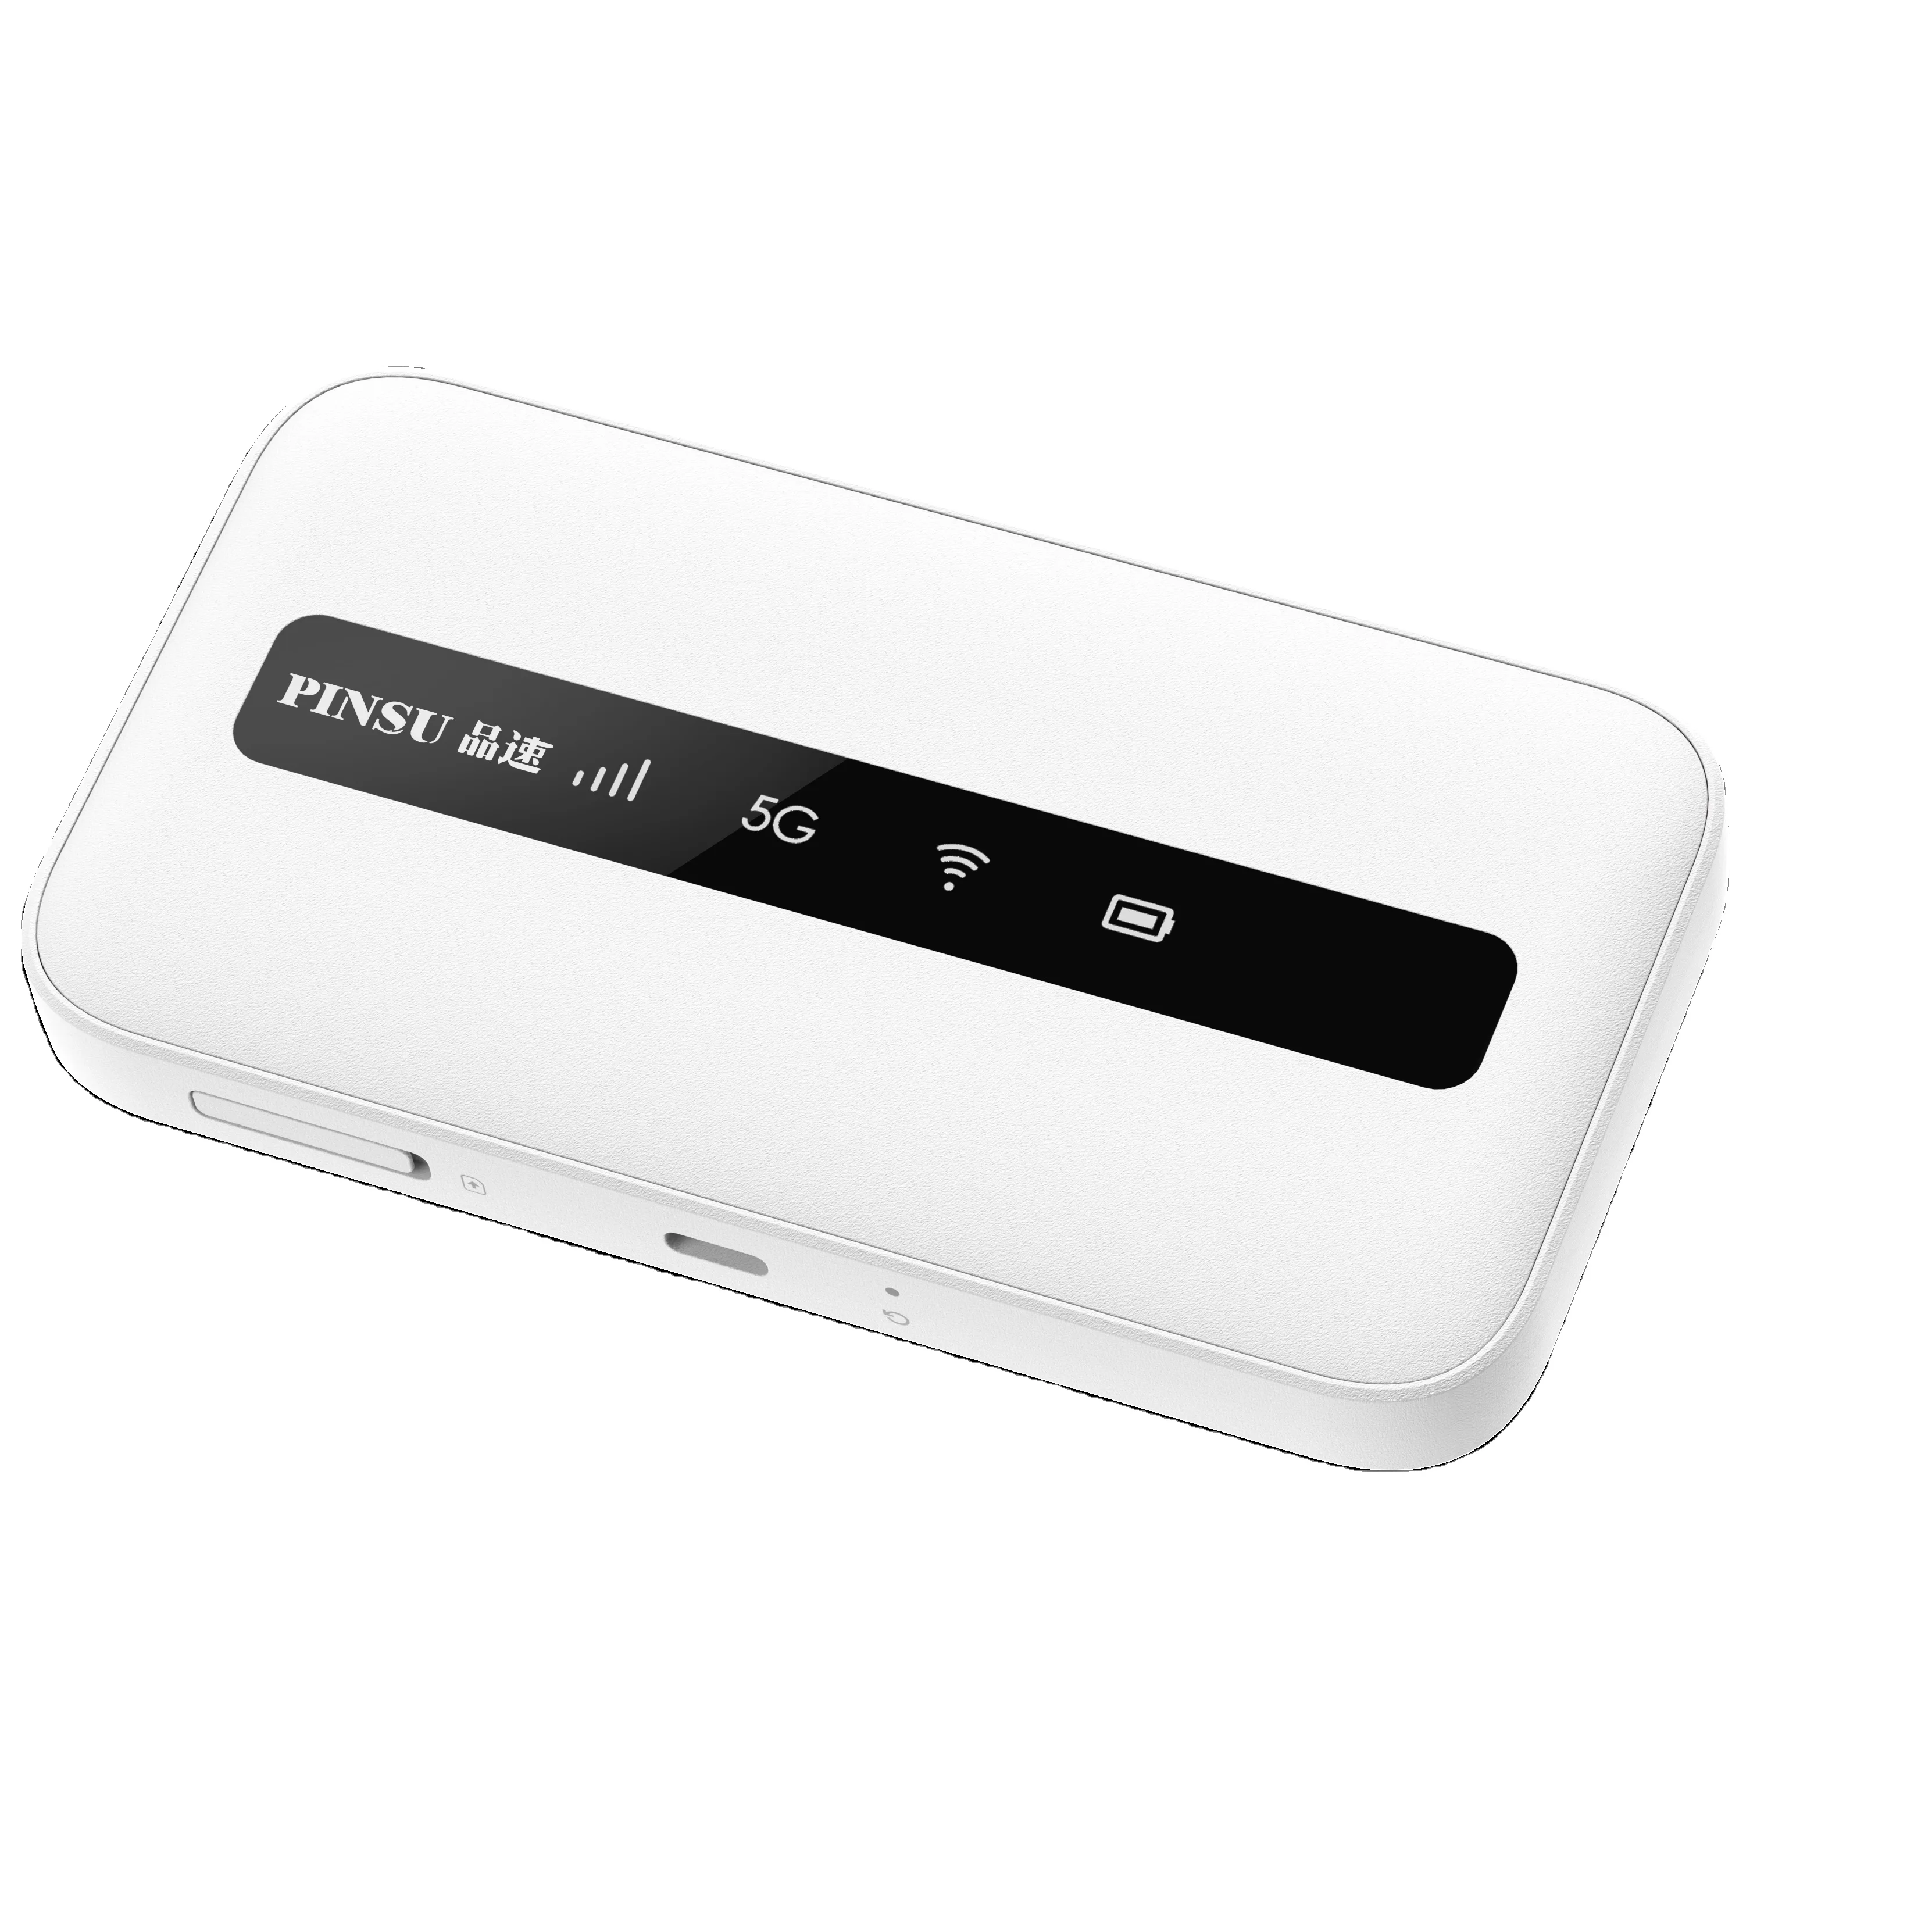 

Newest Factory R100 5G mobile router cpe 5g portable mifis modem high speed 5g wifi router wireless with sim card slot